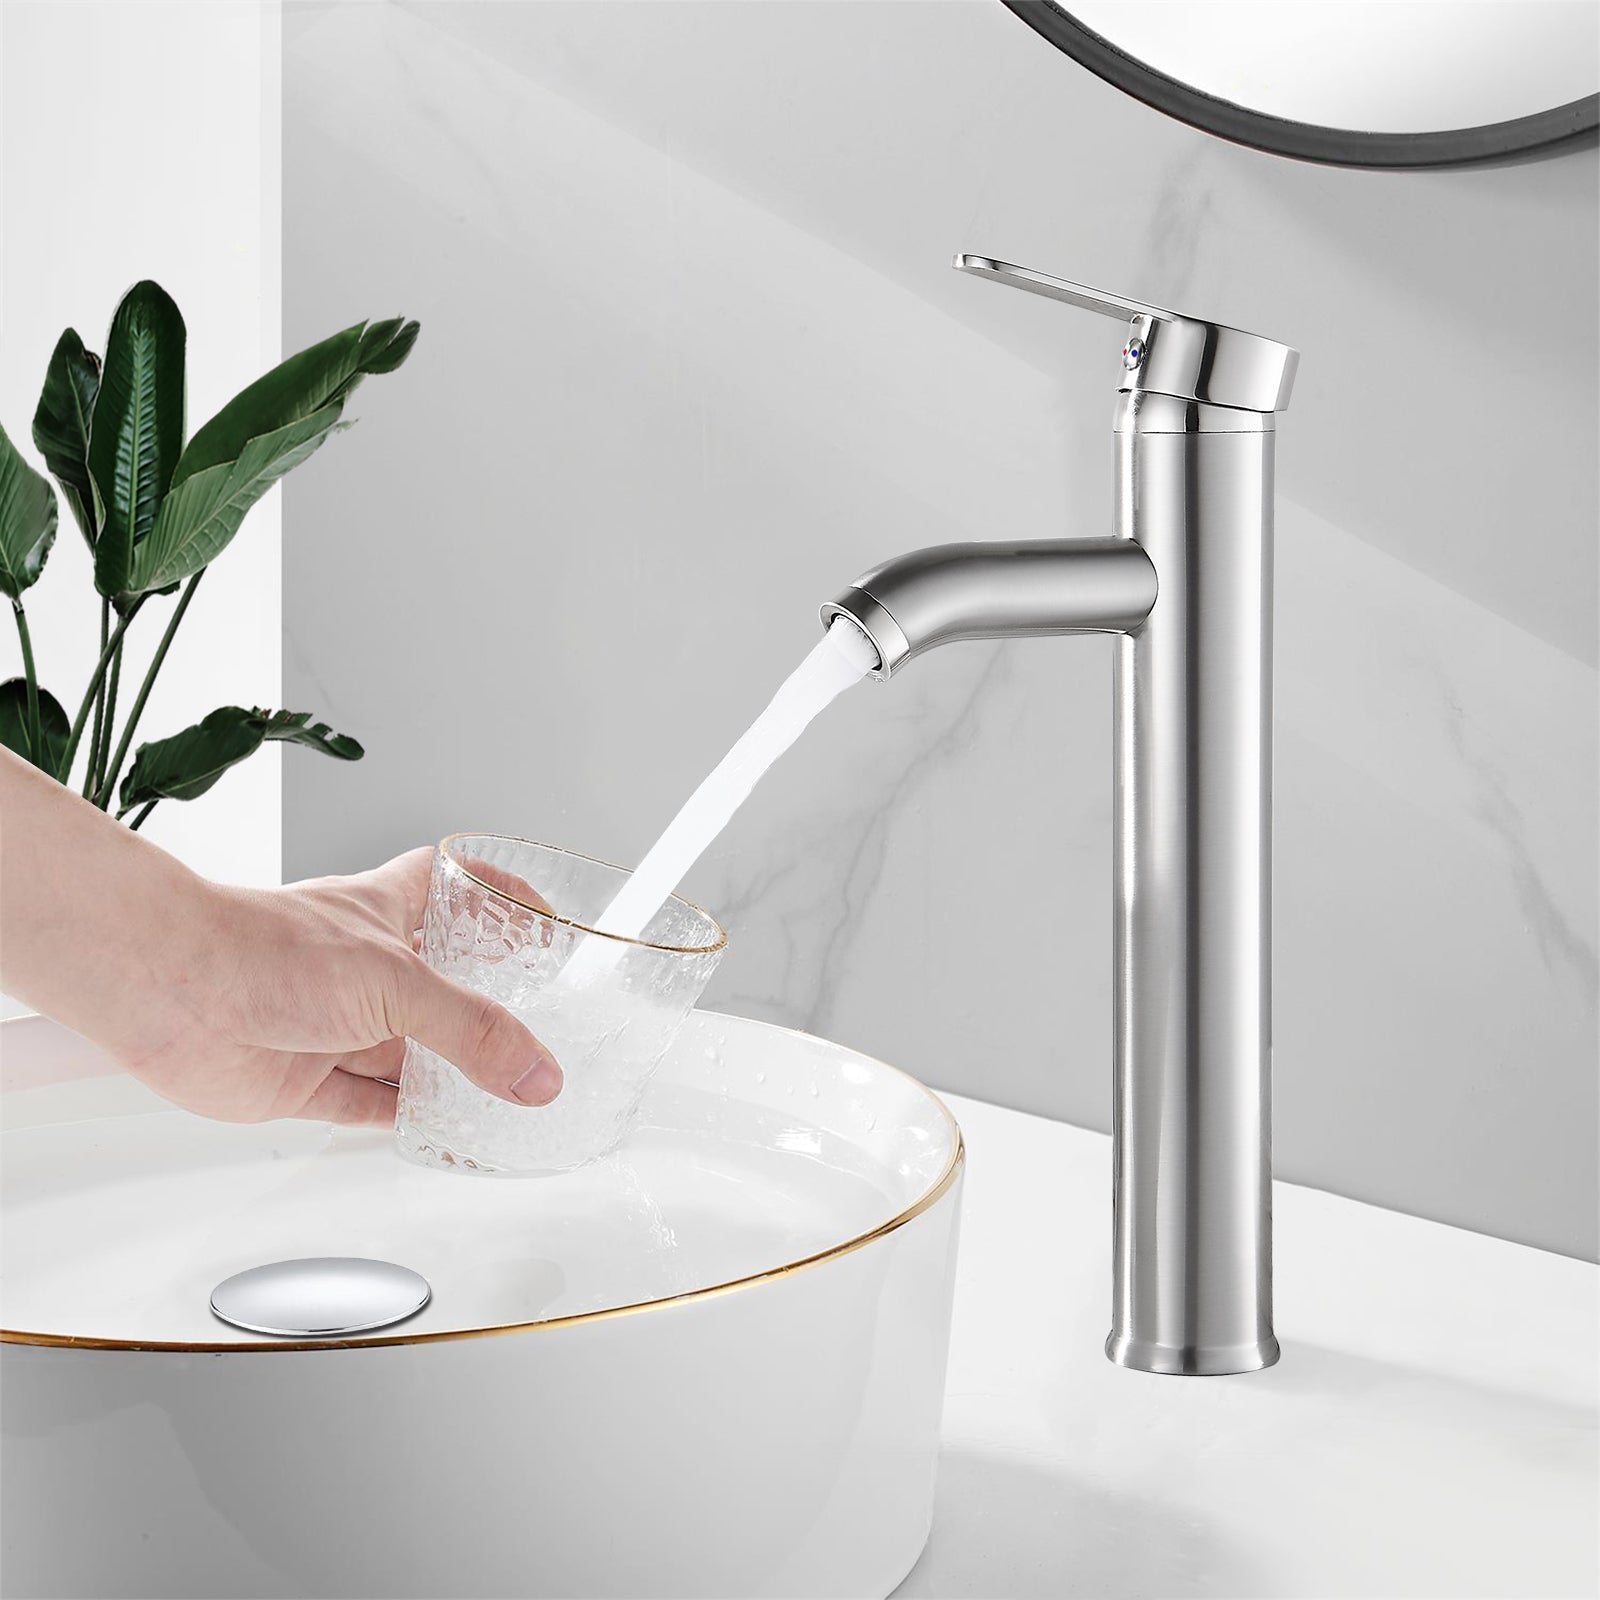 Heyalan Brushed Nickel Bathroom Faucet Vessel Sink Deck Mount Stainless Steel SUS304 Bowl Basin One Hole Singl Handle Tall Spout Mixer Tap Plastic Pop Up Drain Without Overflow